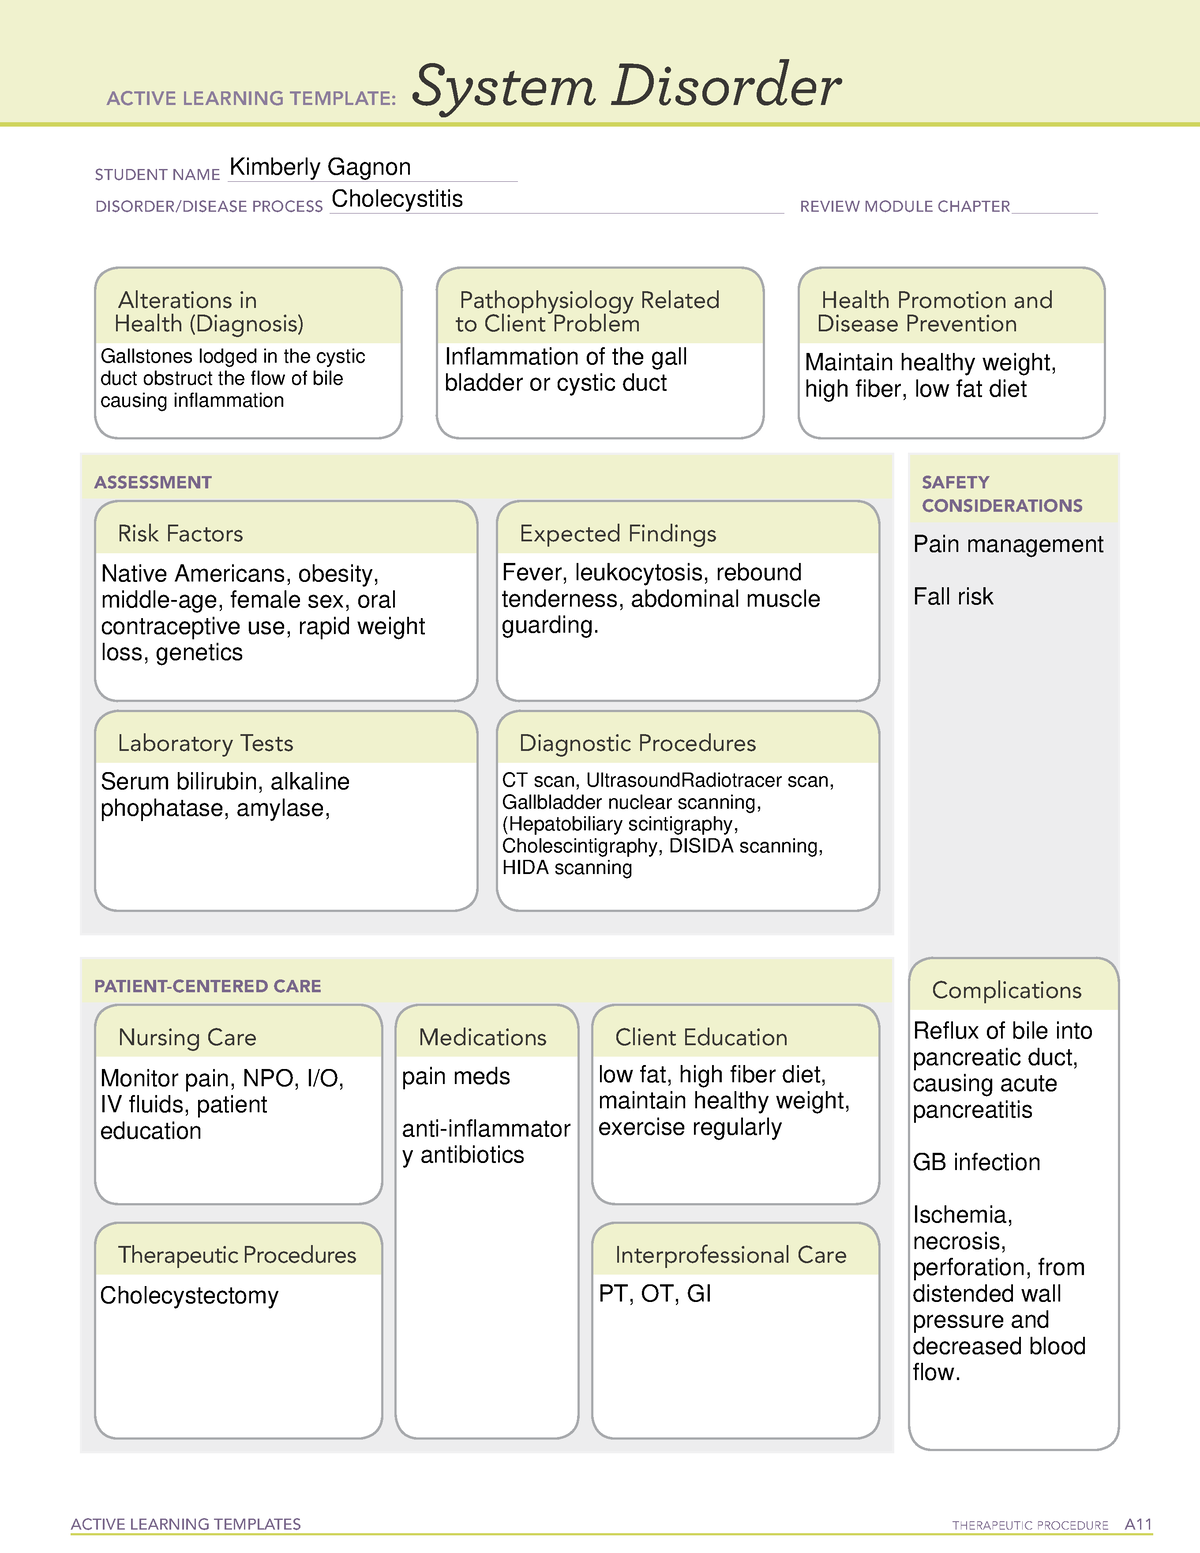 Cholecystitis ATI System Disorder Template - ACTIVE LEARNING TEMPLATES ...